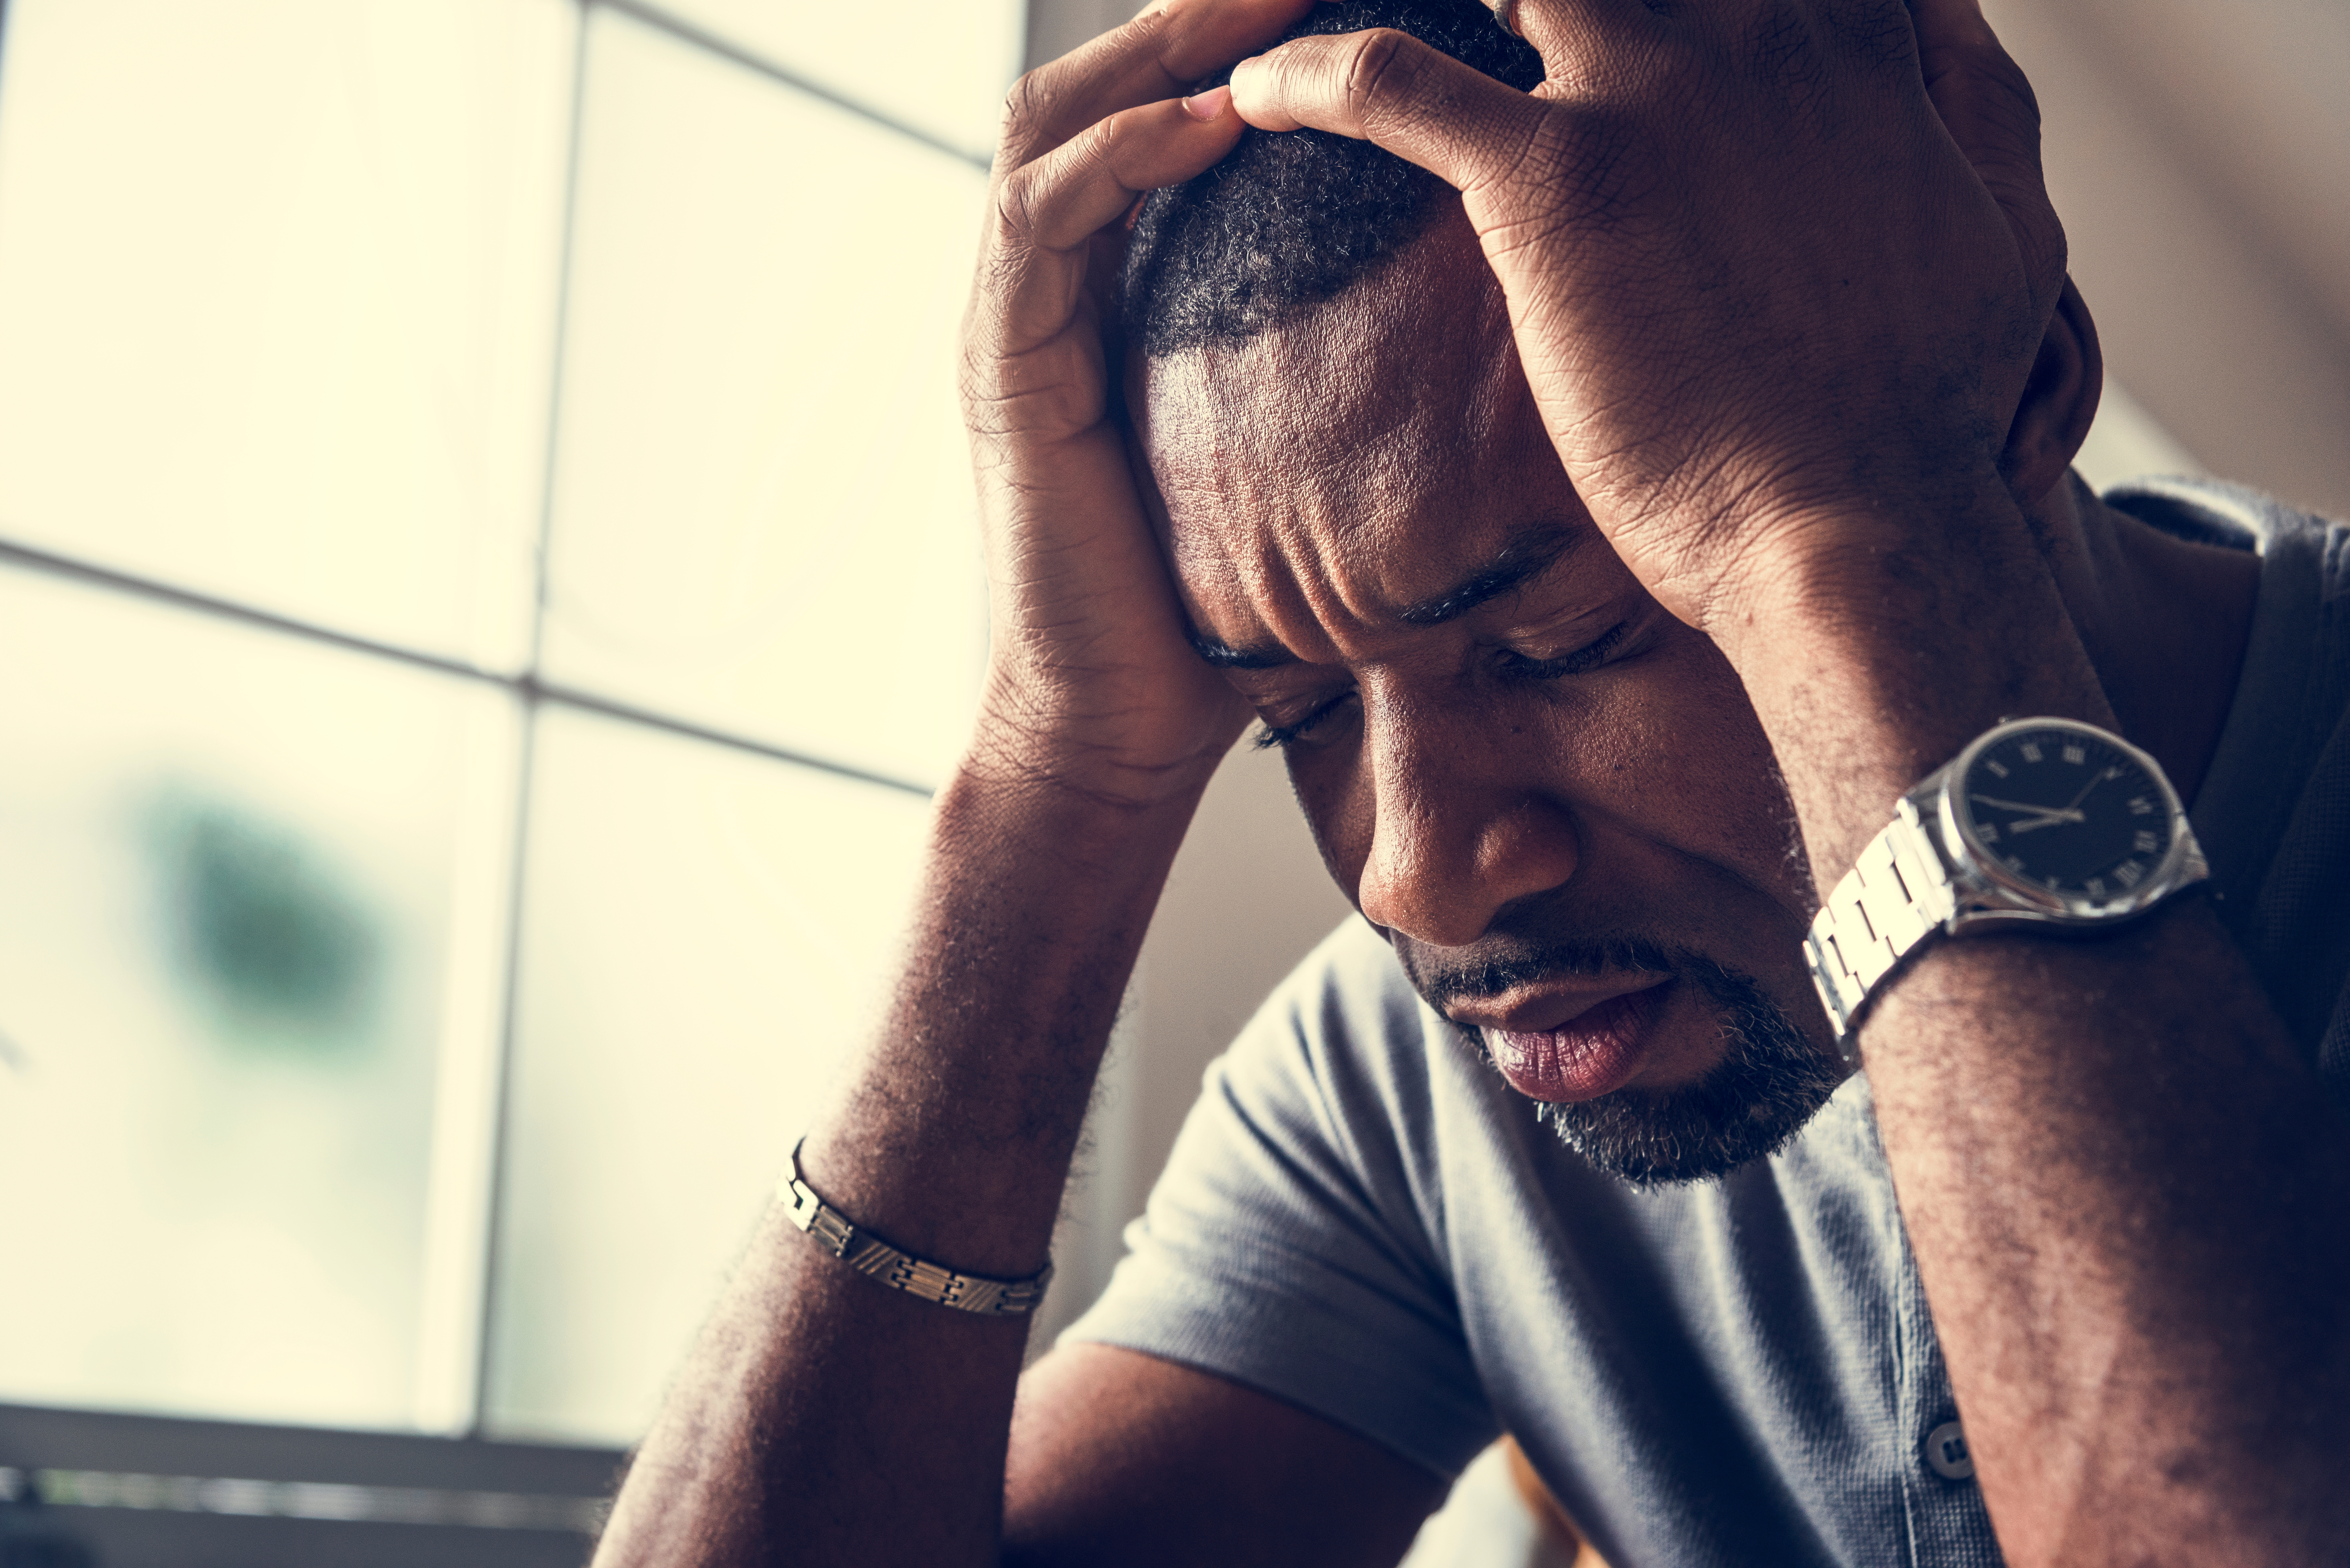 A stressed-out black man sits holding his head in his hands | Source: Shutterstock